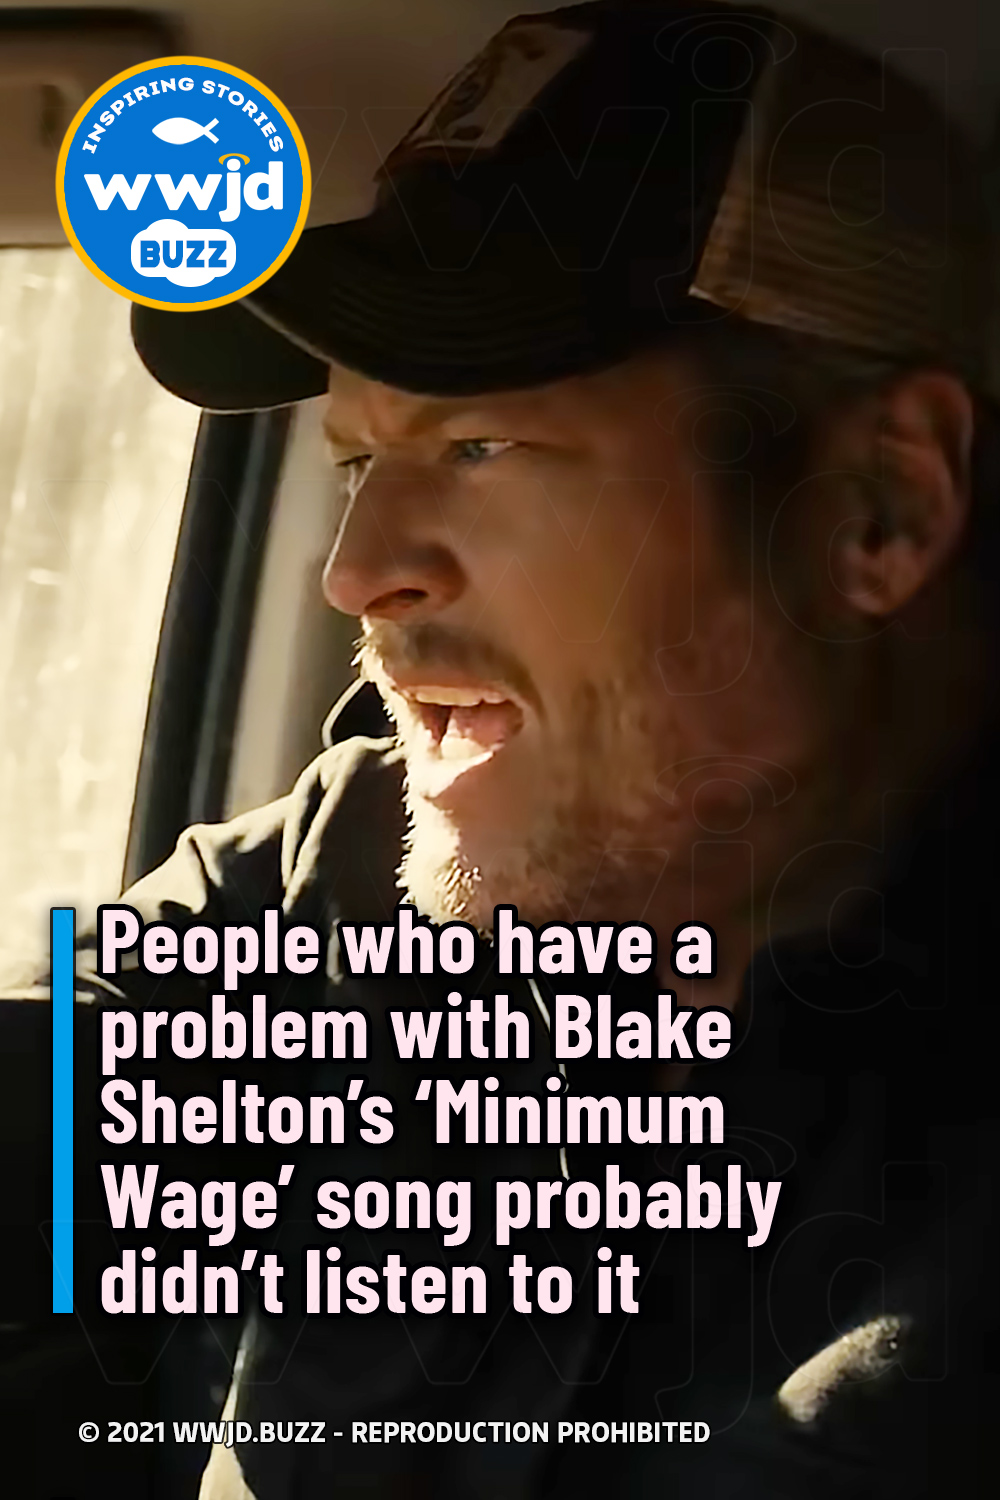 People who have a problem with Blake Shelton’s ‘Minimum Wage’ song probably didn’t listen to it